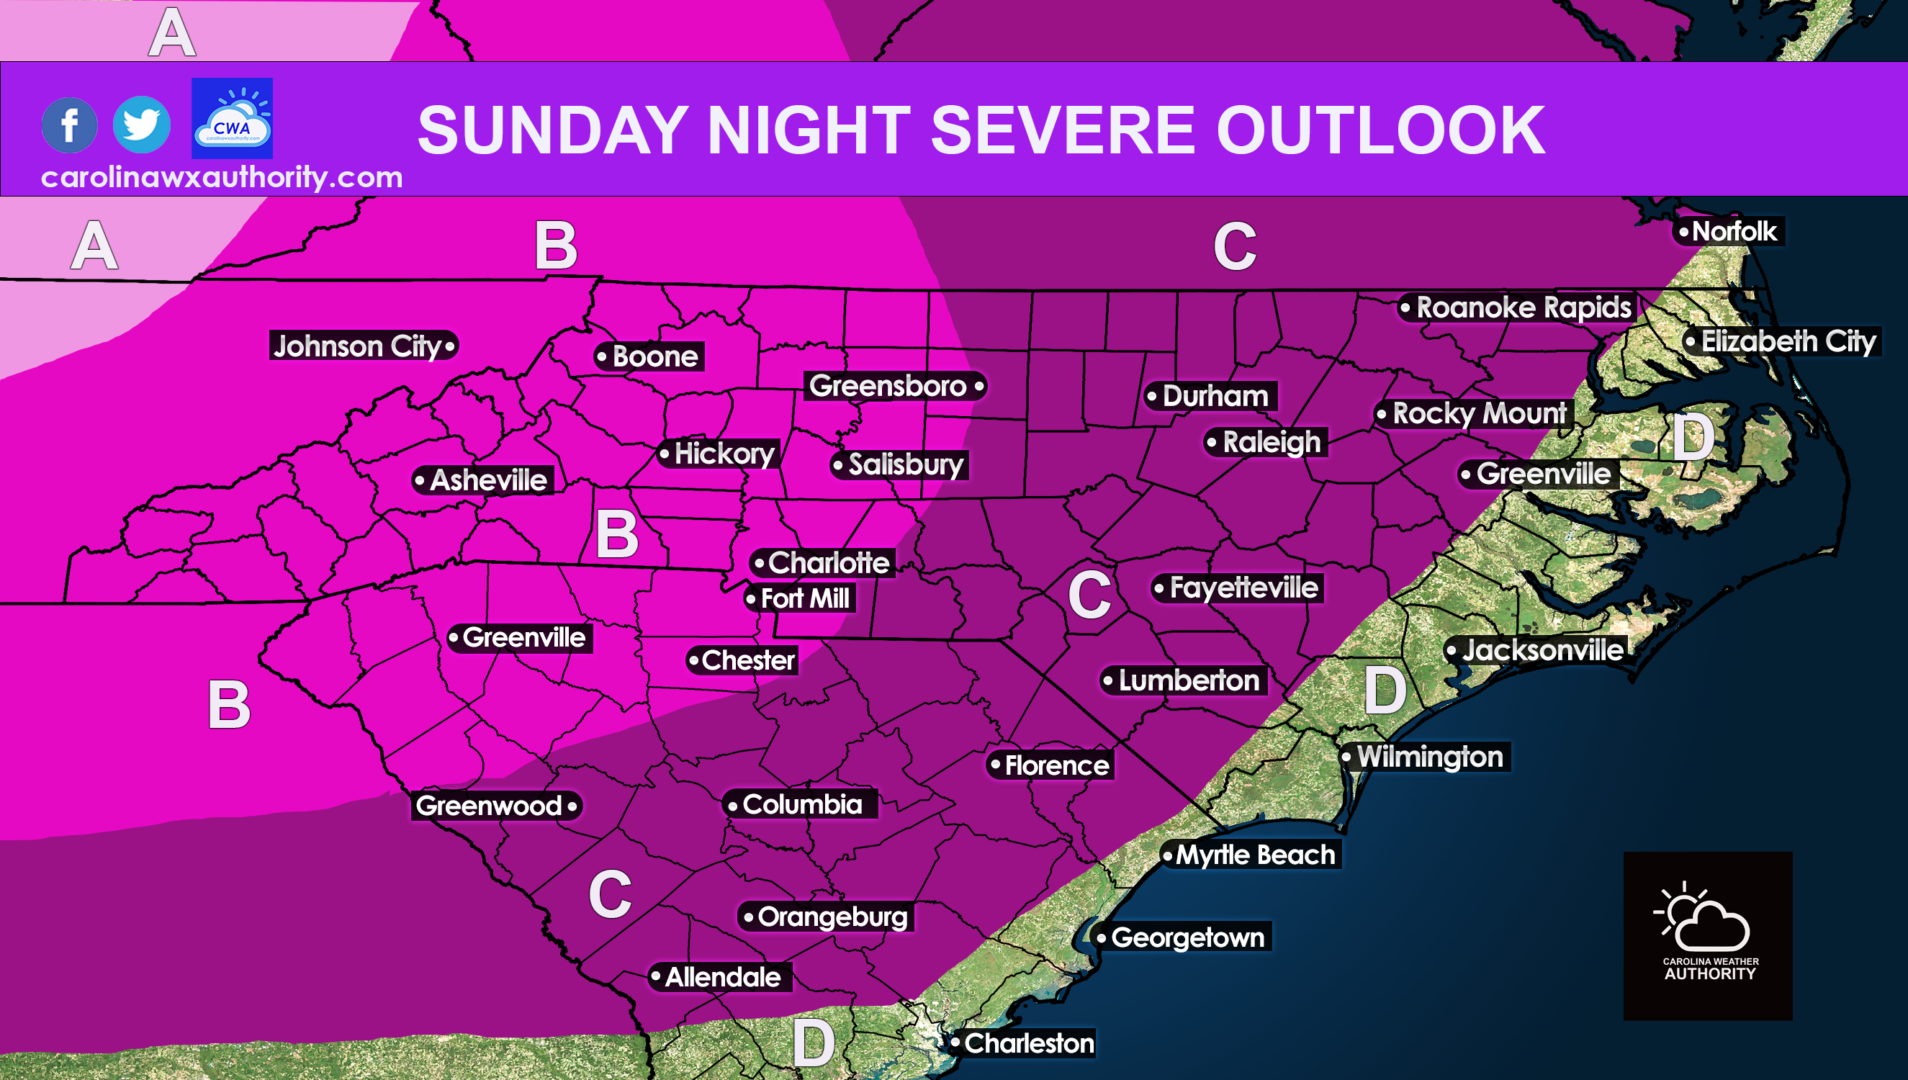 Severe Storms Could Disrupt Sunday Night Outdoor Activities